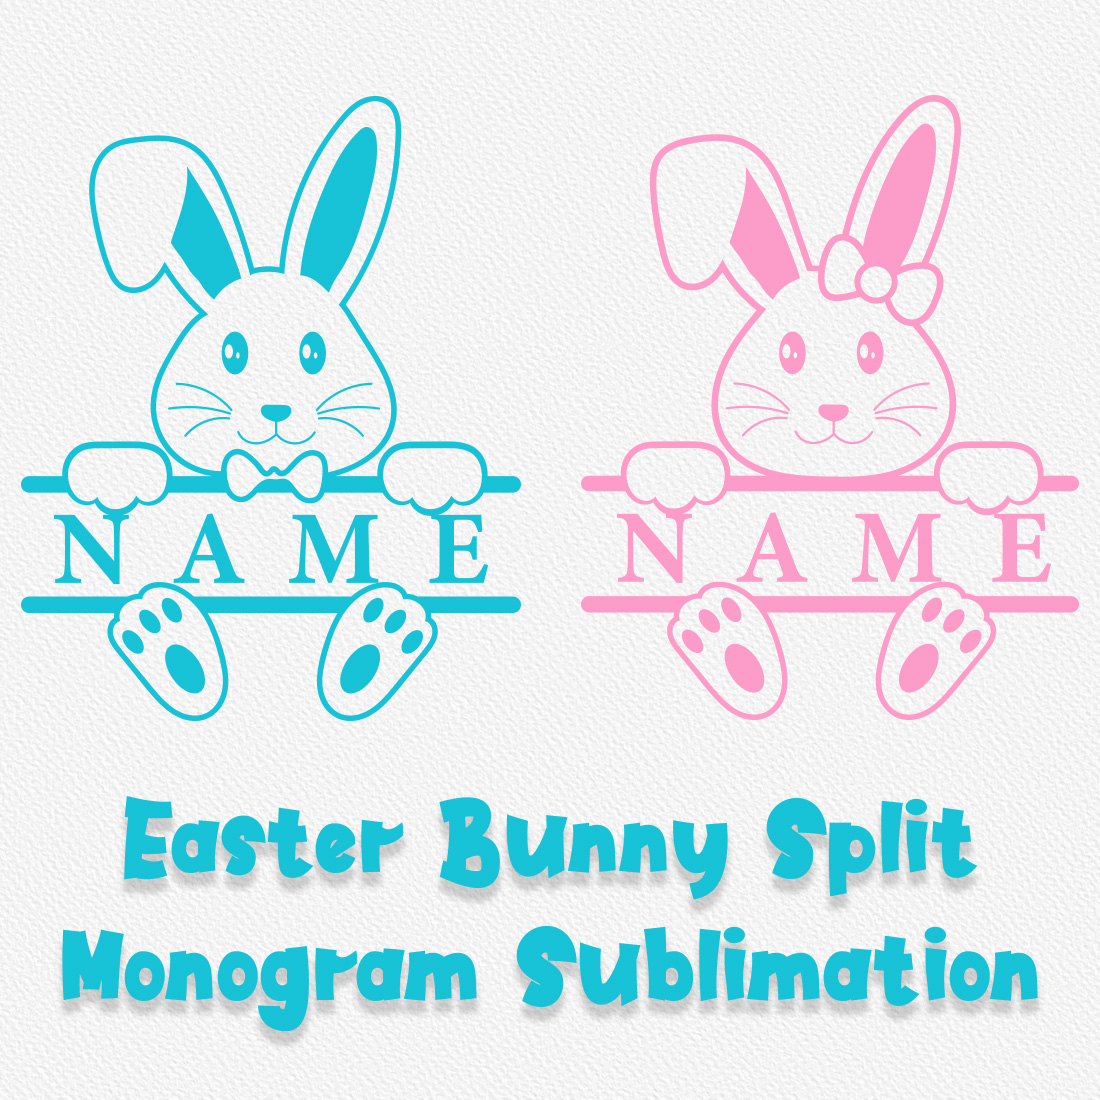 Easter Bunny Split Monogram Png Sublimation, Easter Bunny Png, Easter Png, Bunny split Png / Bunny Face Png, Cute Bunny Boy & Girl Png cover image.